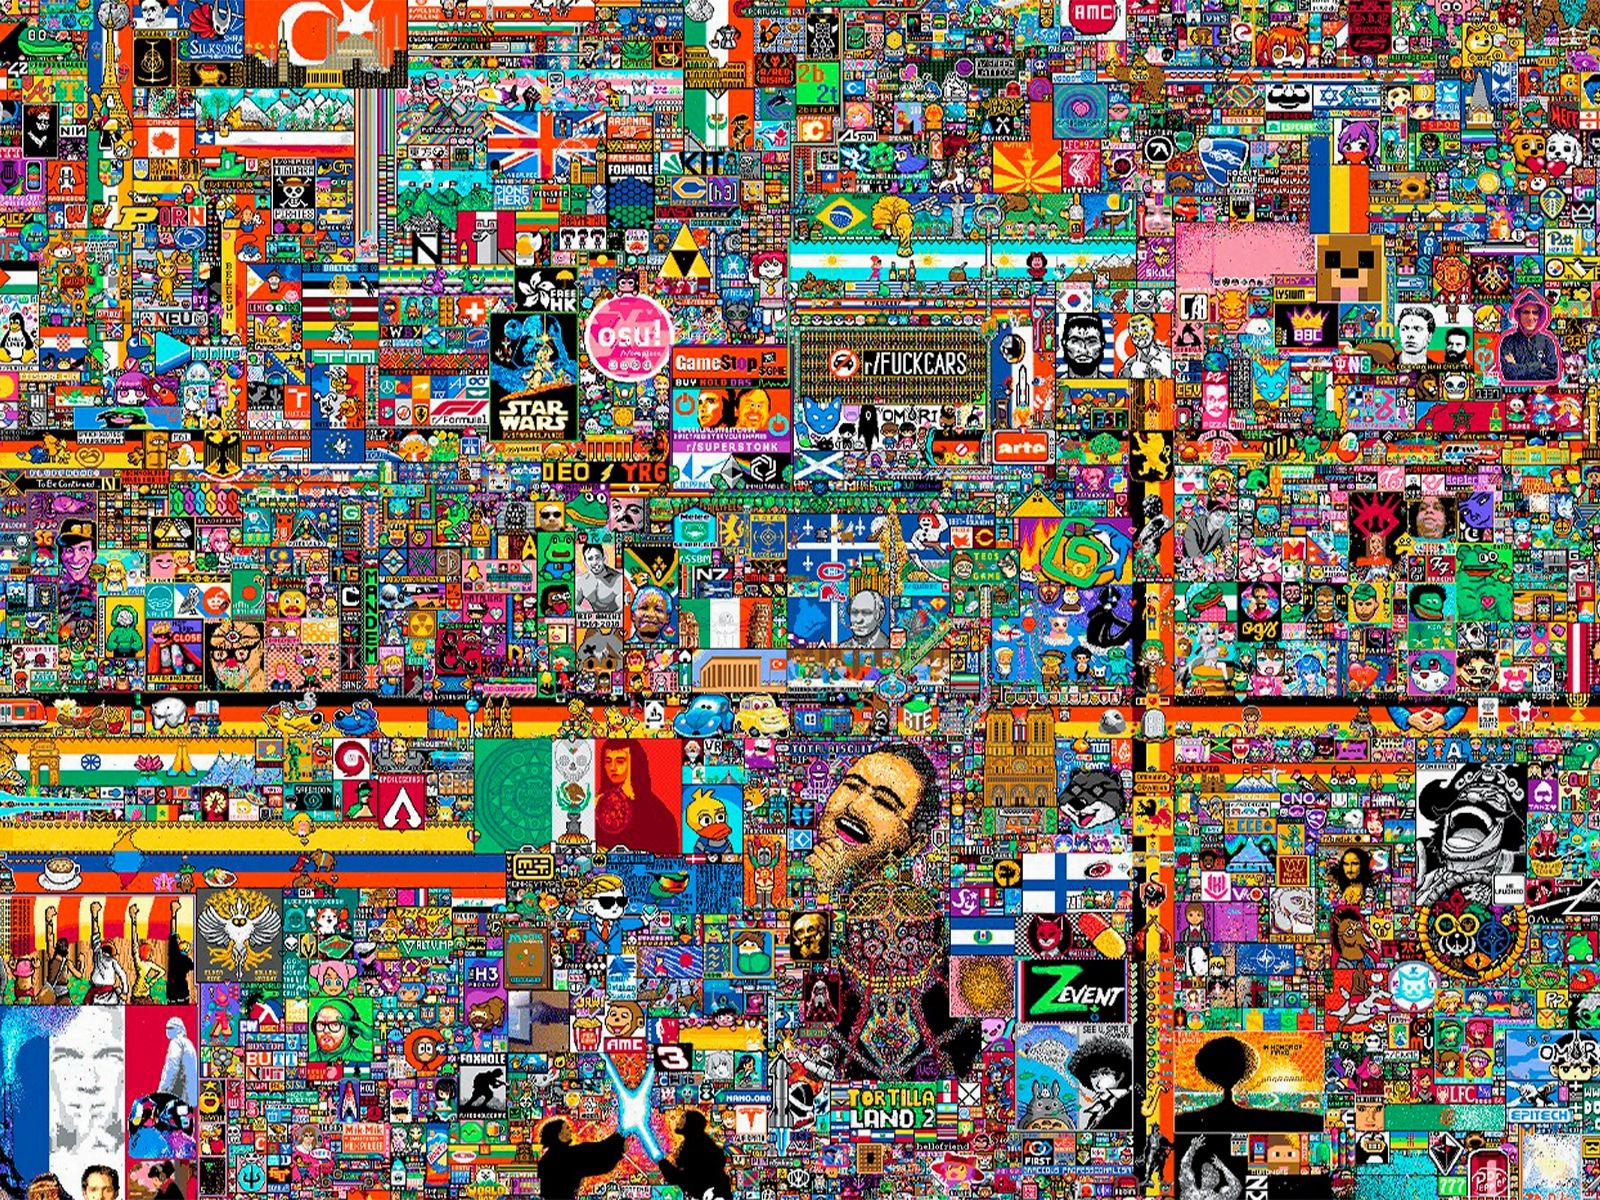 Reddit brings back the r/place subreddit five years later